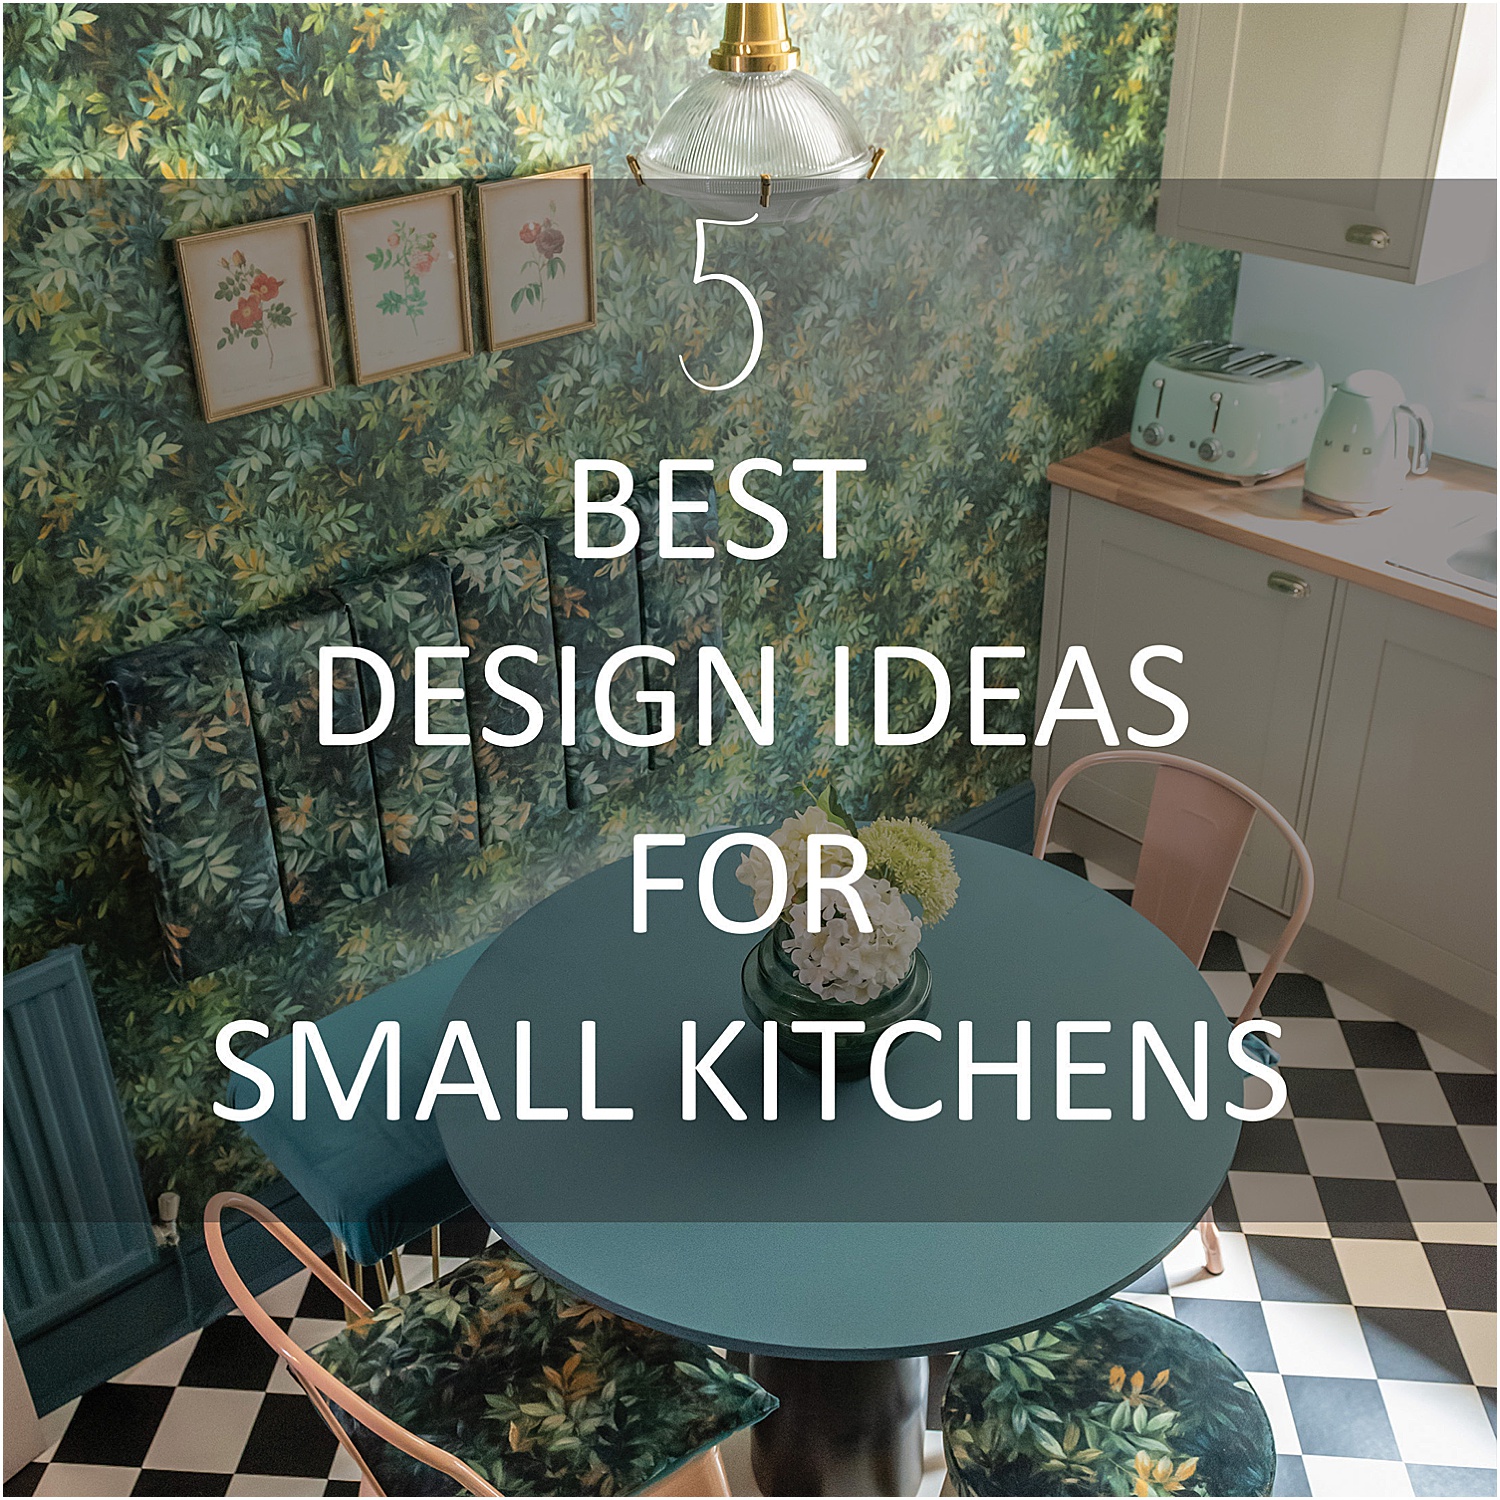 5-best-design-ideas-for-small-kitchens-layered-home-lily-sawyer-photo